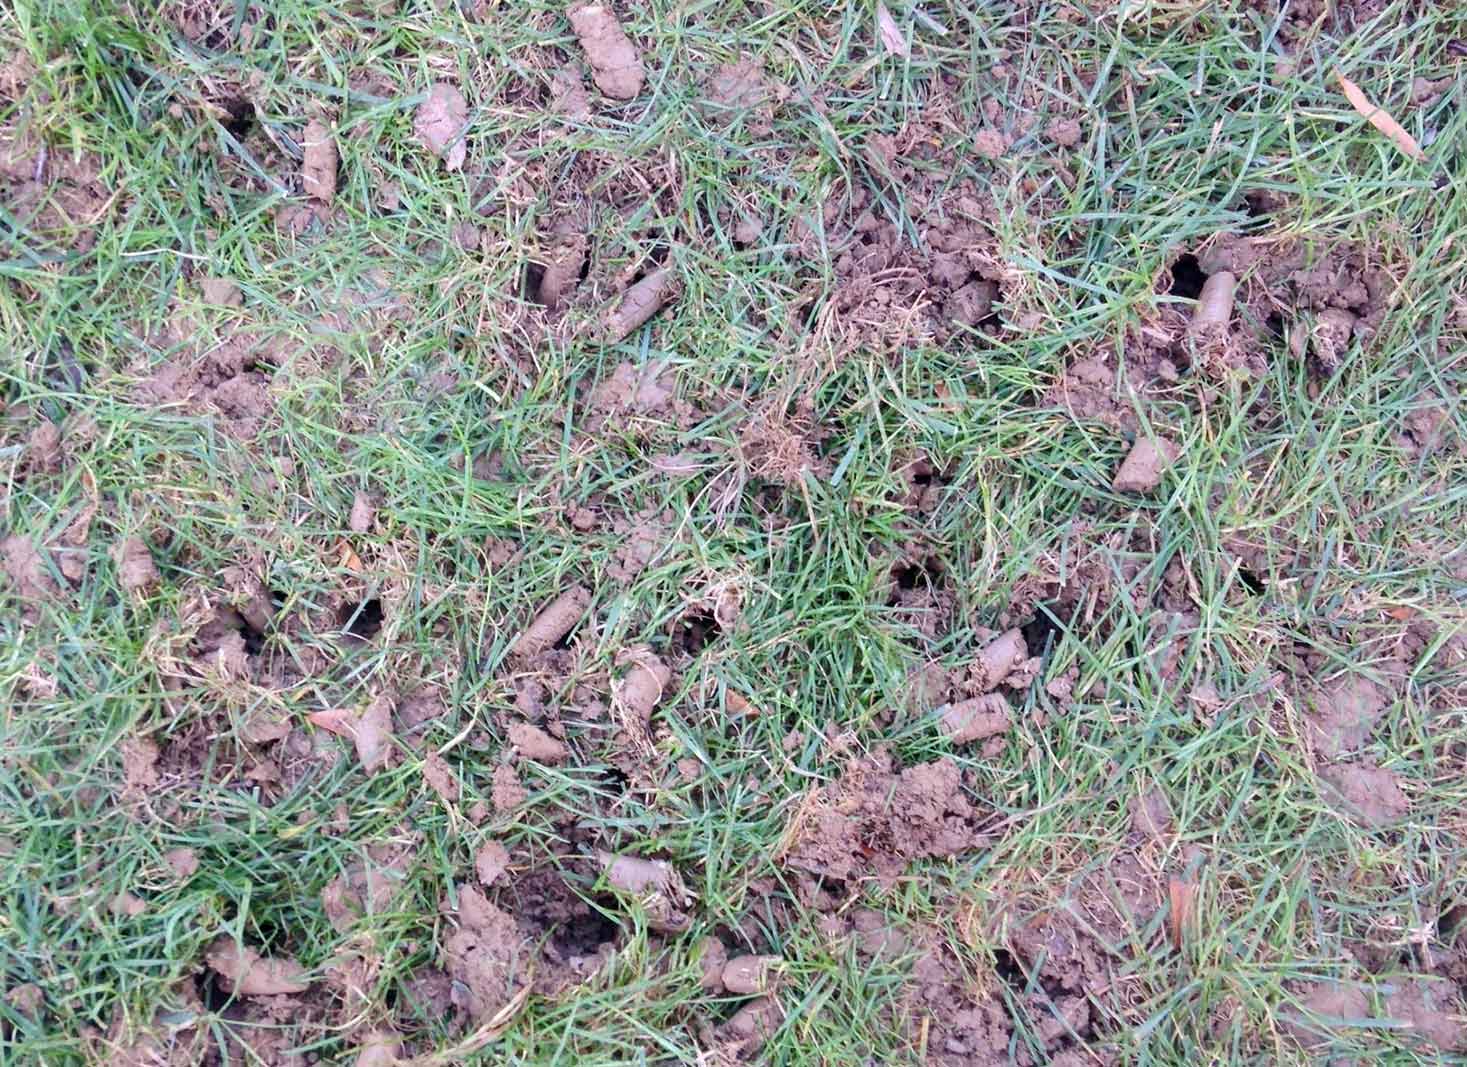 Benefits of leaving soil plugs on the lawn